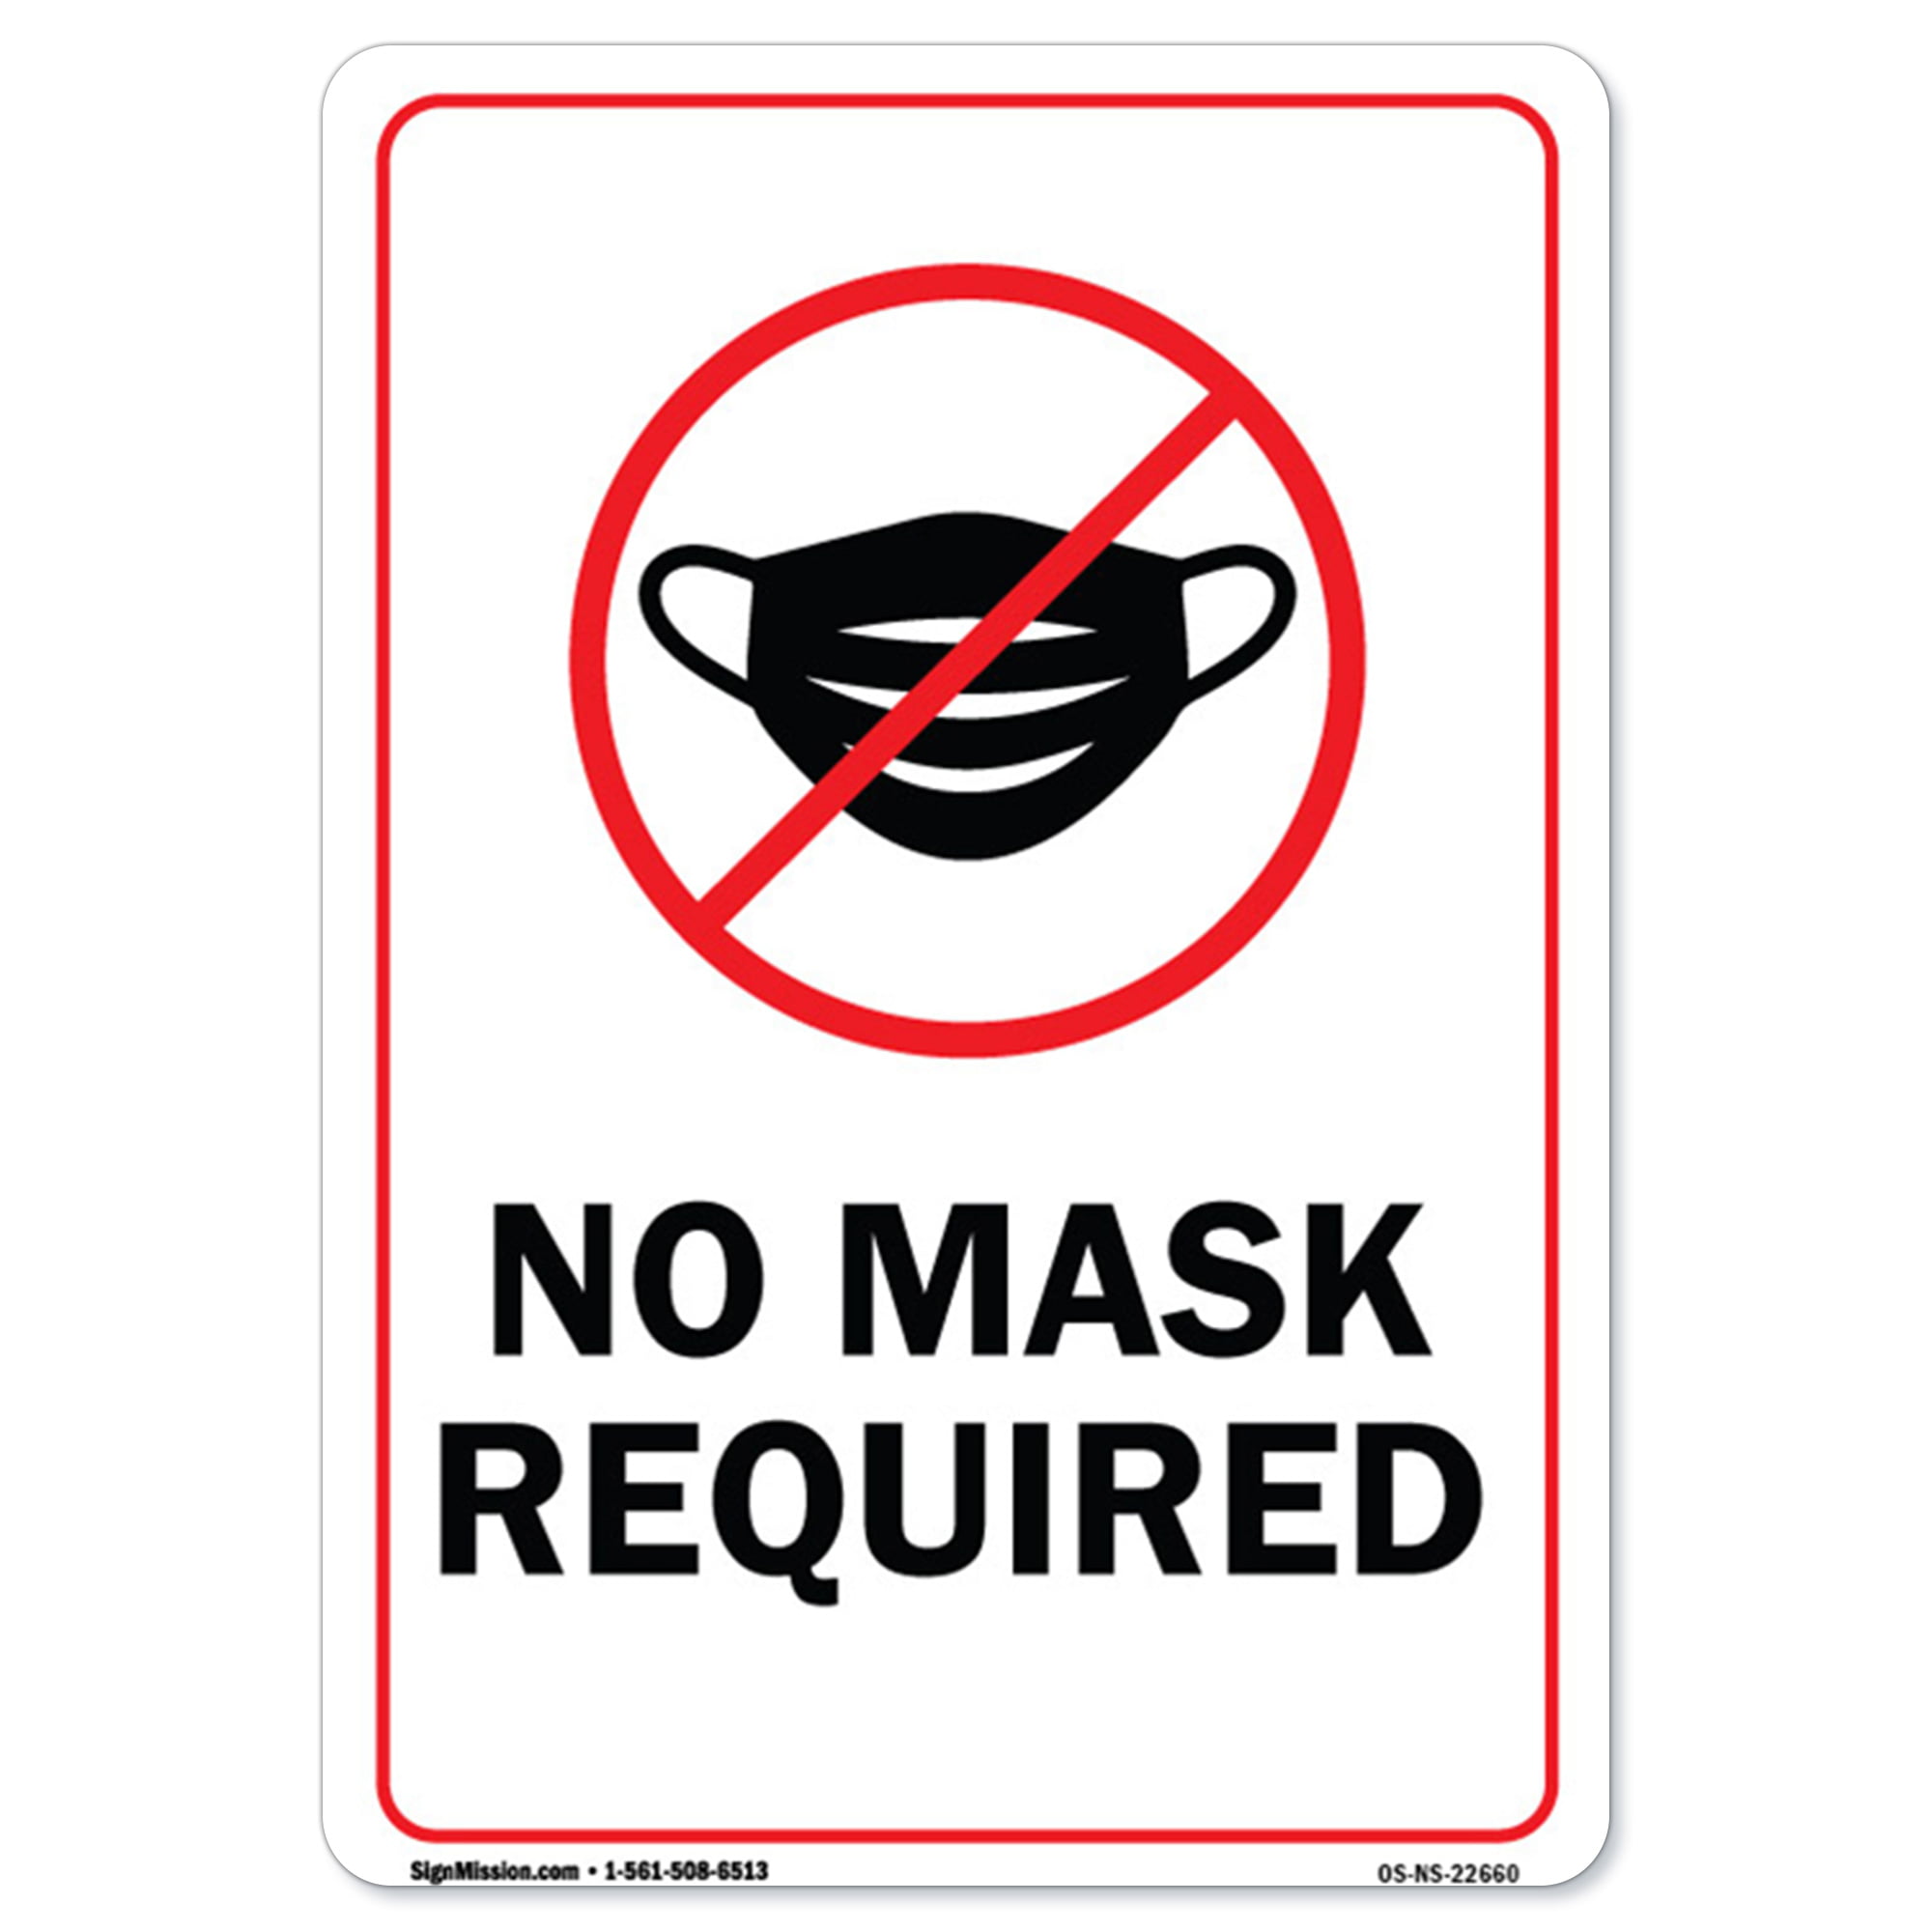 COVID-19 Notice Sign - No Mask Required, Heavy-Gauge Aluminum Parking Sign, Protect Your Business, Municipality, Home & Colleagues